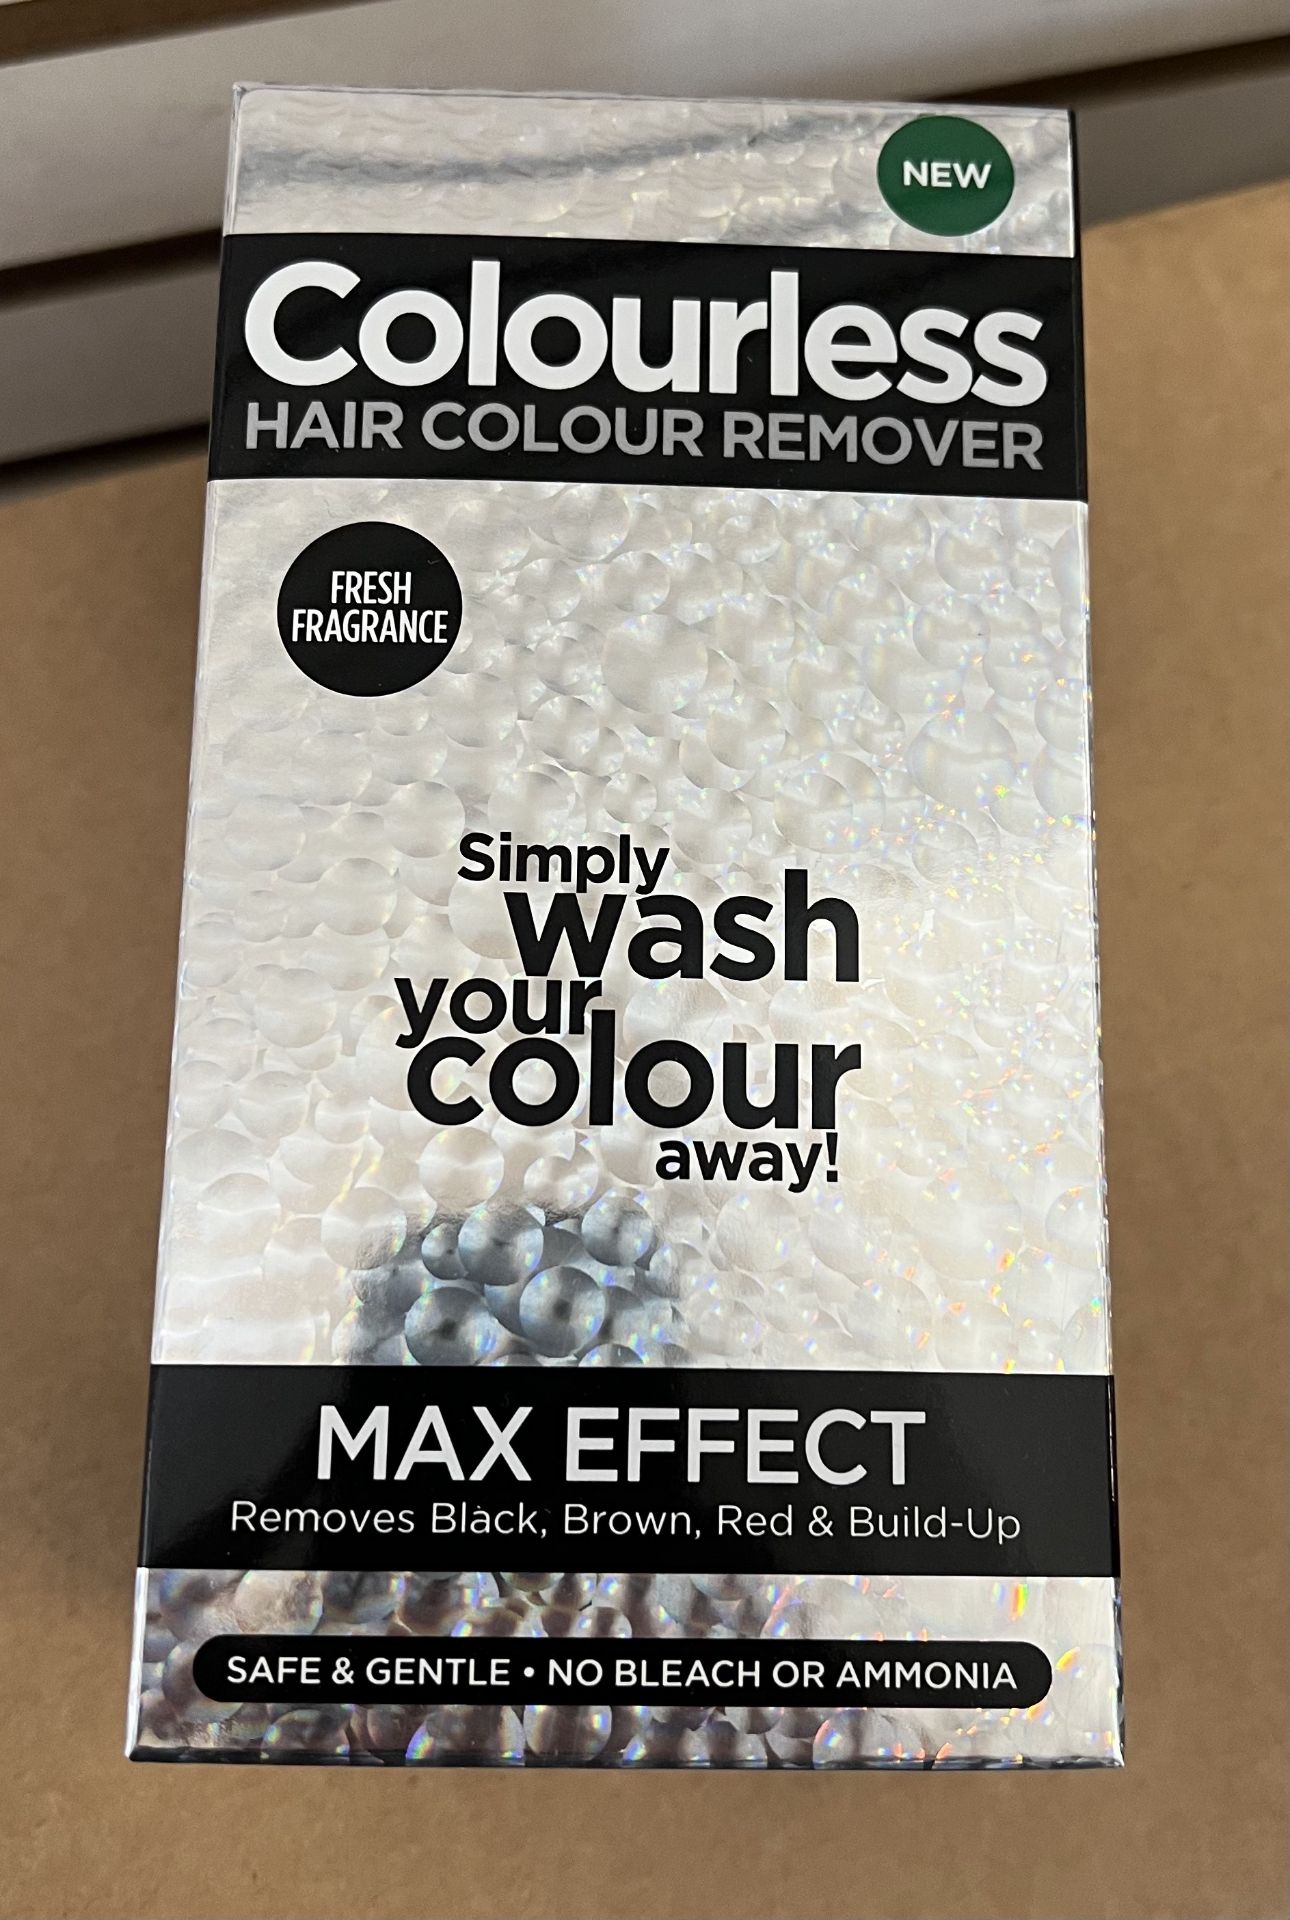 36 x Revolution London Colourless Max Effect Hair Colour Remover - Image 3 of 7